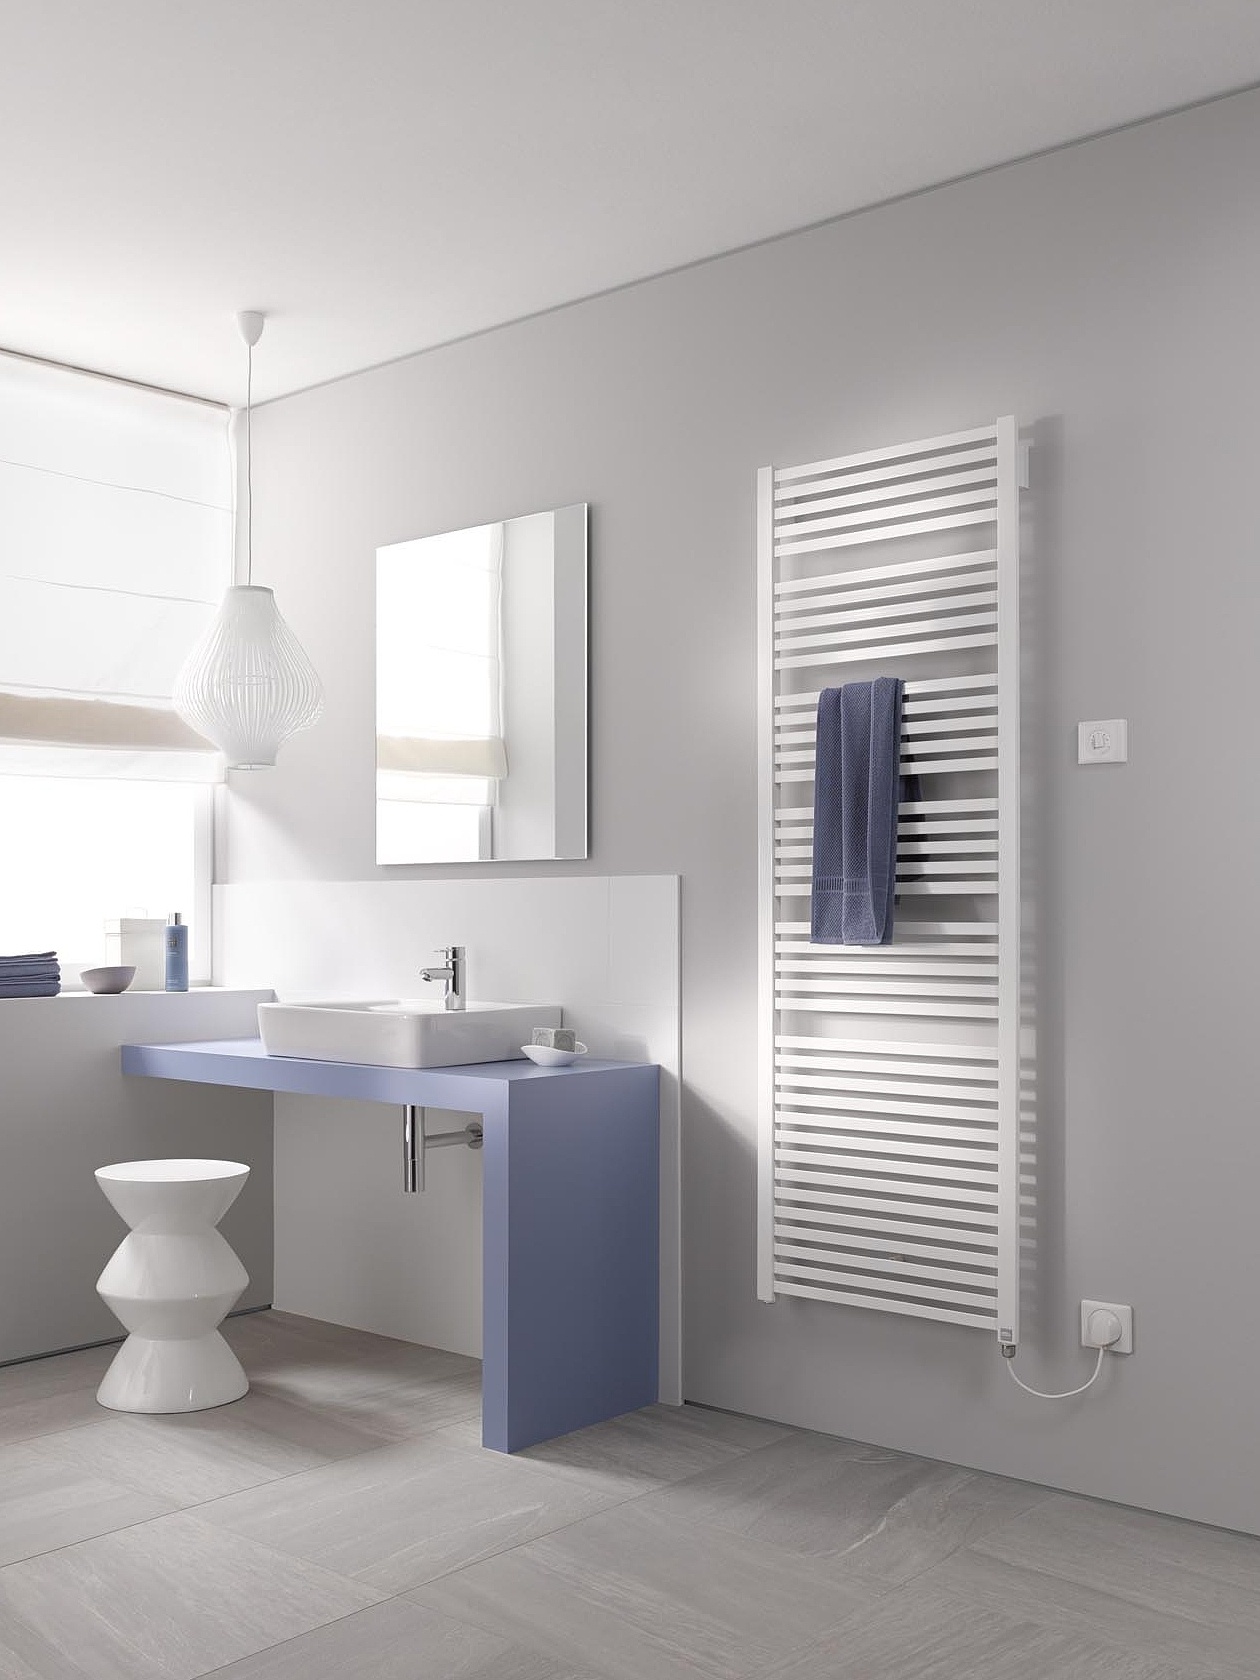 The Kermi Geneo quadris design and bathroom radiator is also available in an electric version.